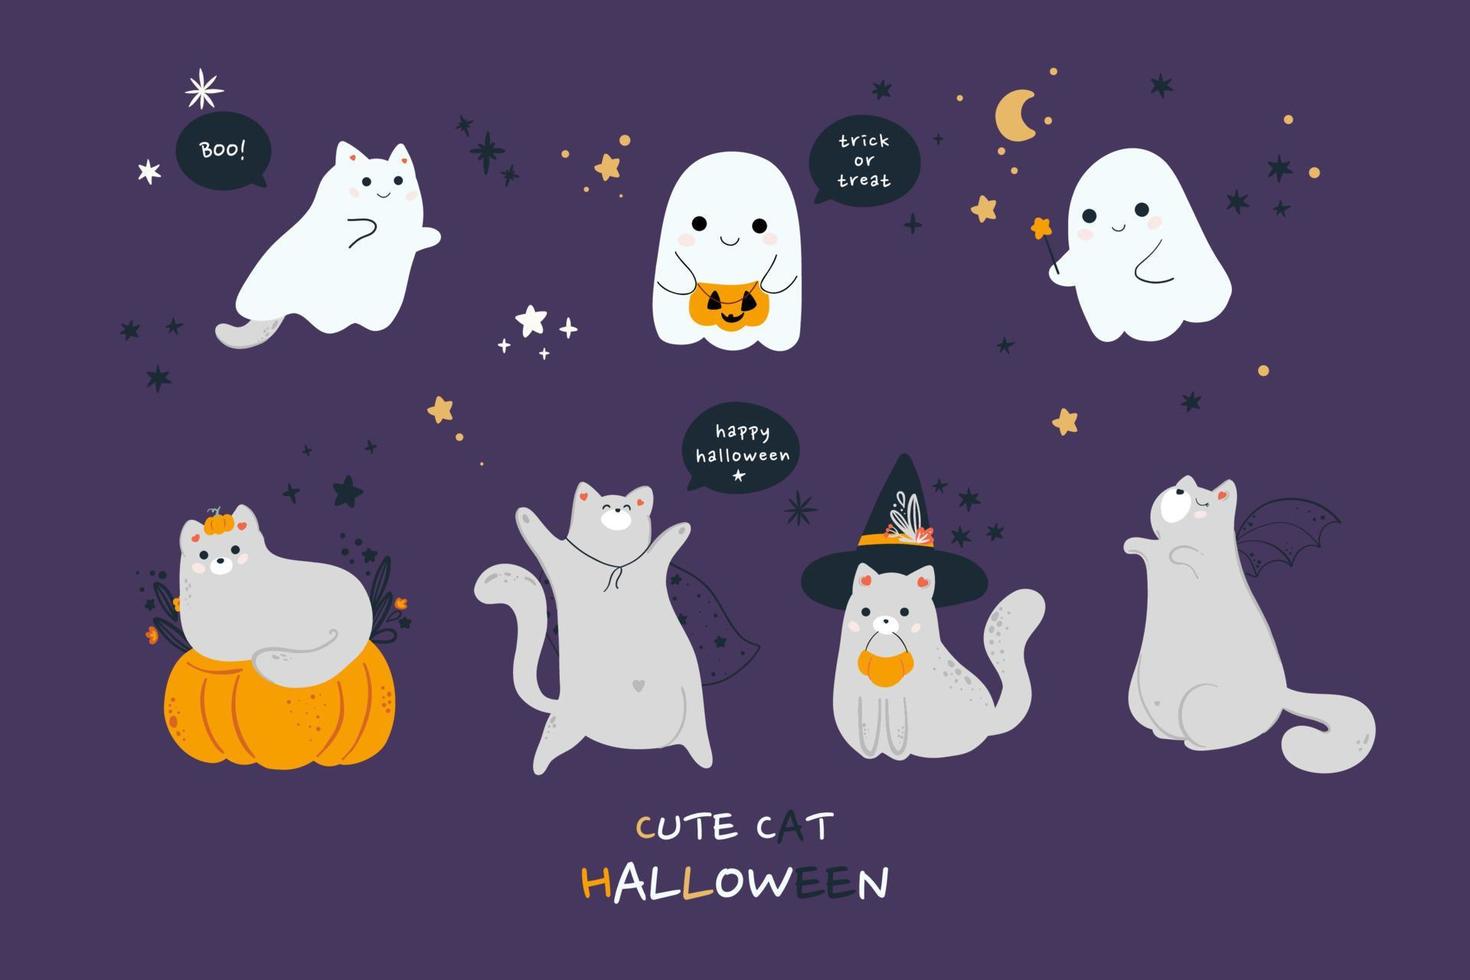 Cute cats in spooky Halloween costumes set. Funny and creepy feline animals in hats for autumn holiday of dead. Scary kitties monsters. Colored flat vector illustration isolated on white background